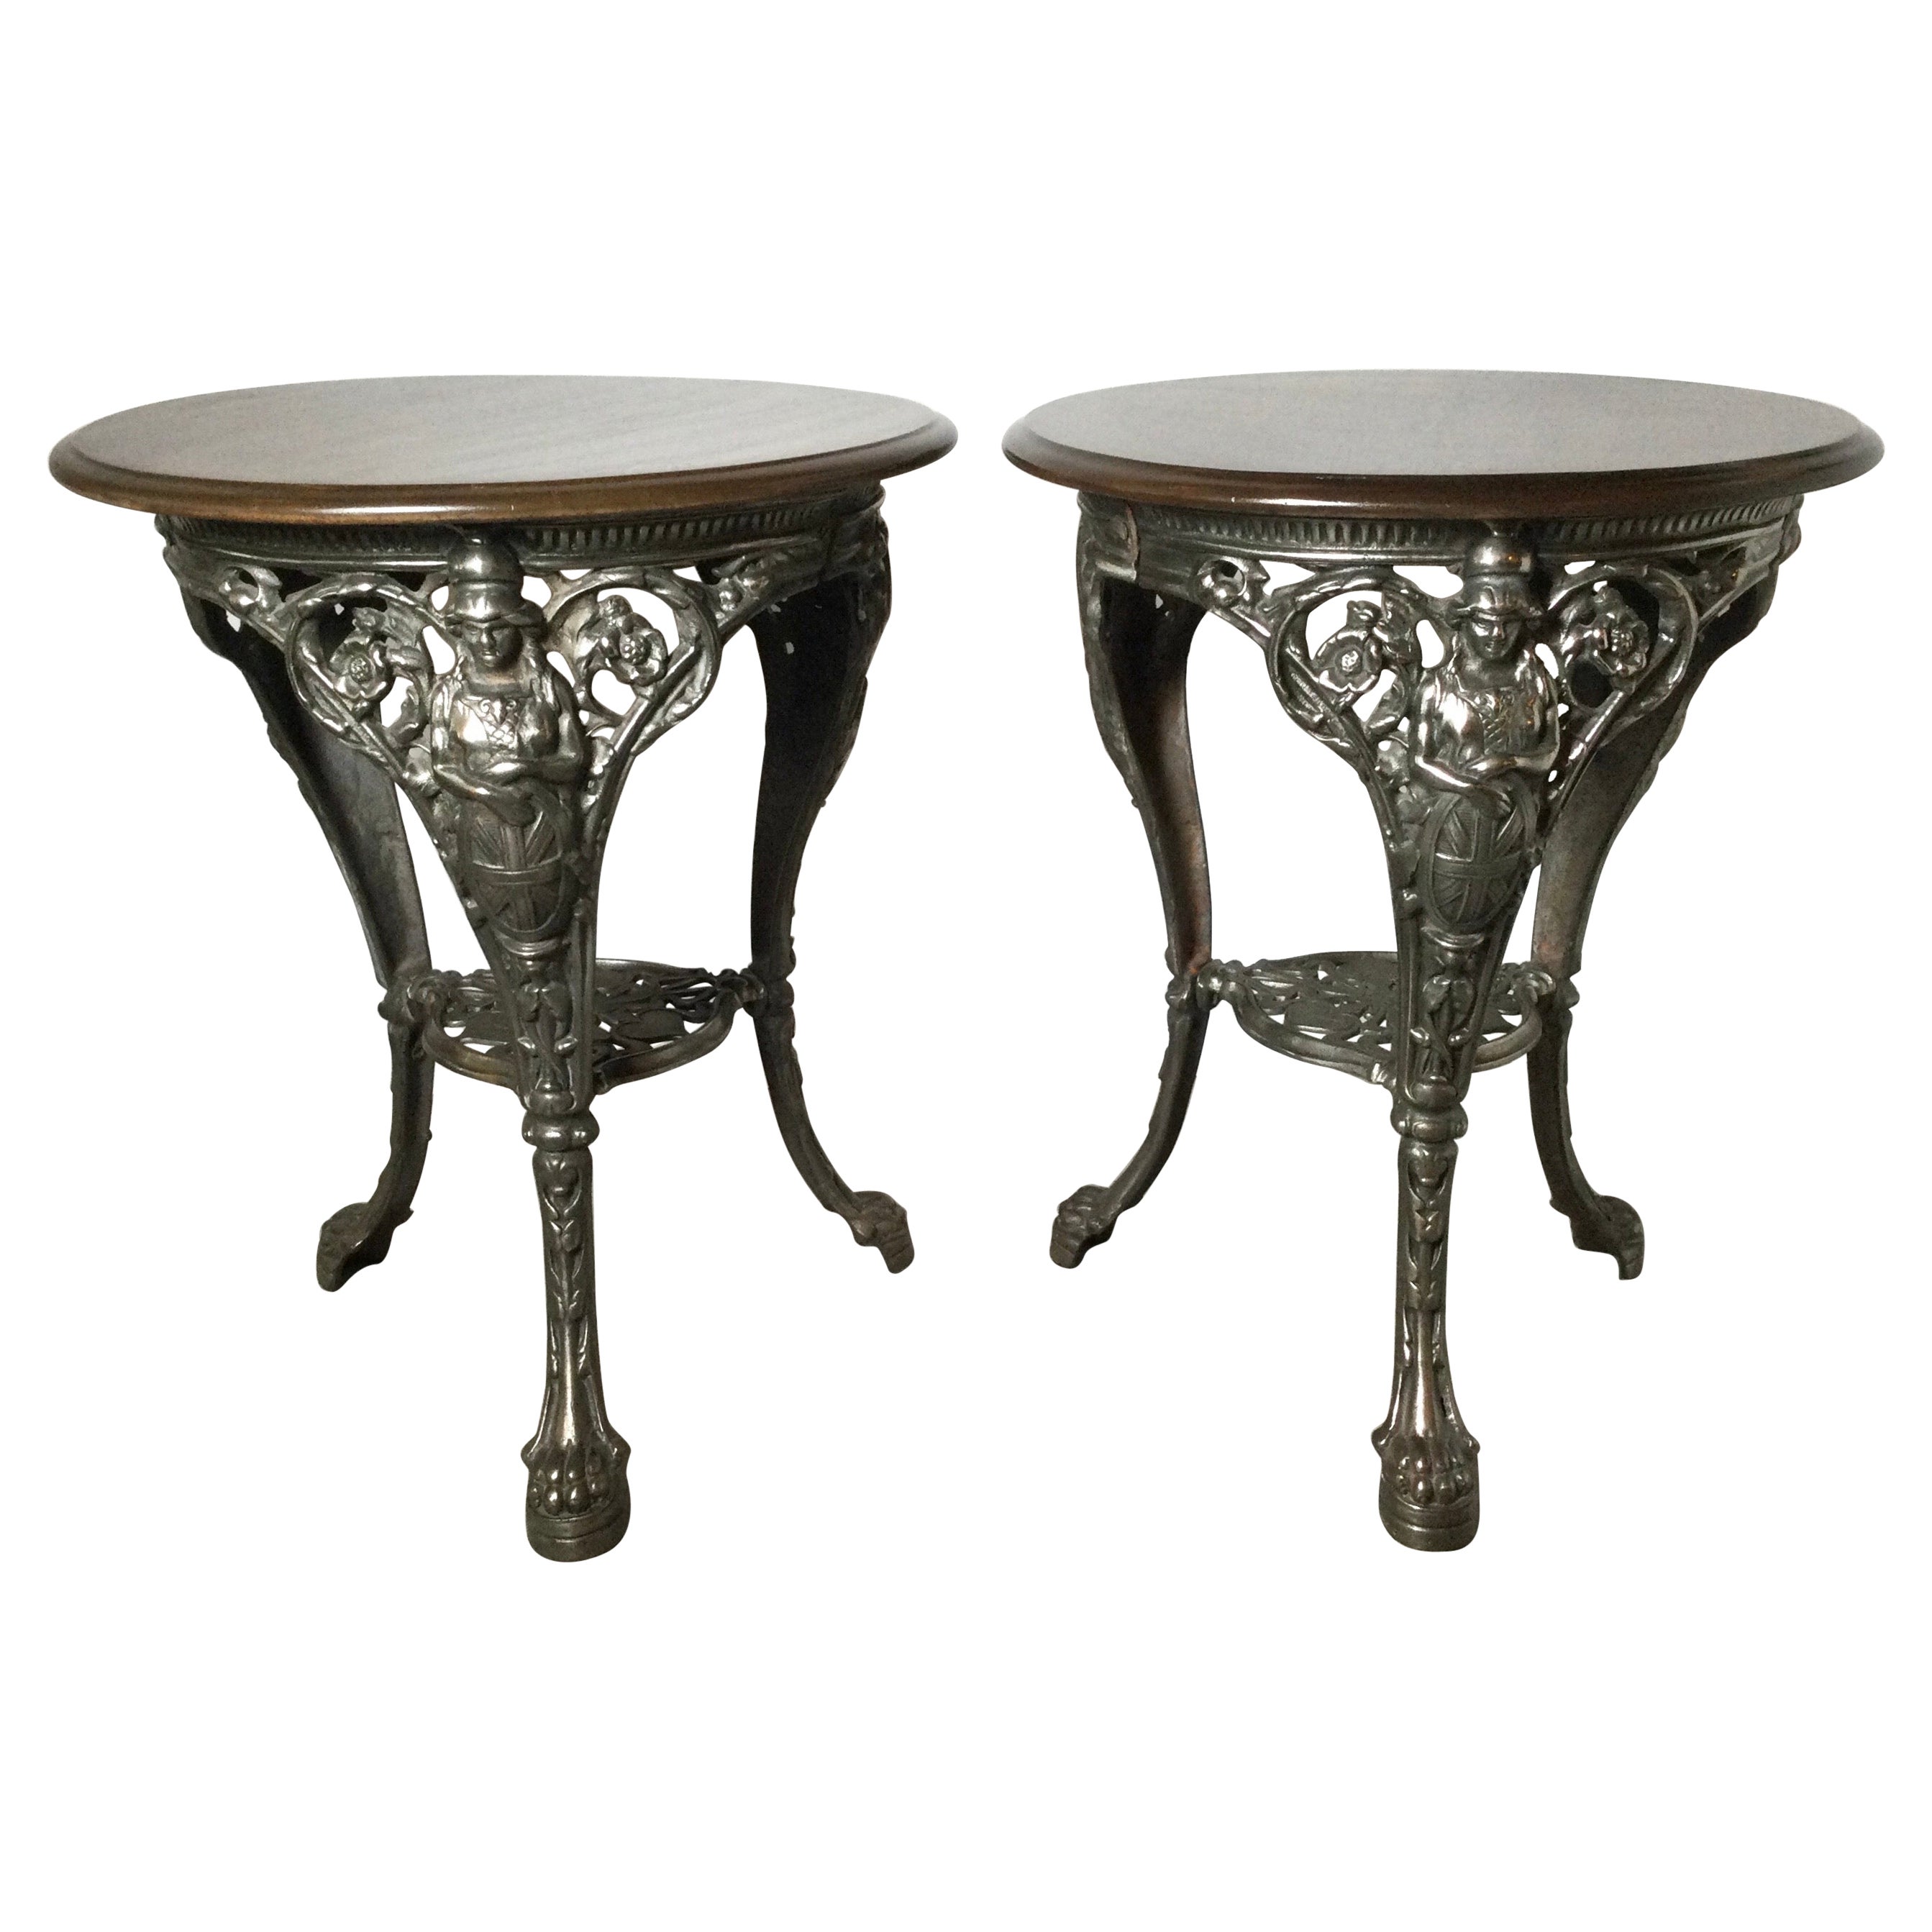 Pair of English Wood and Metal Pub Side Tables